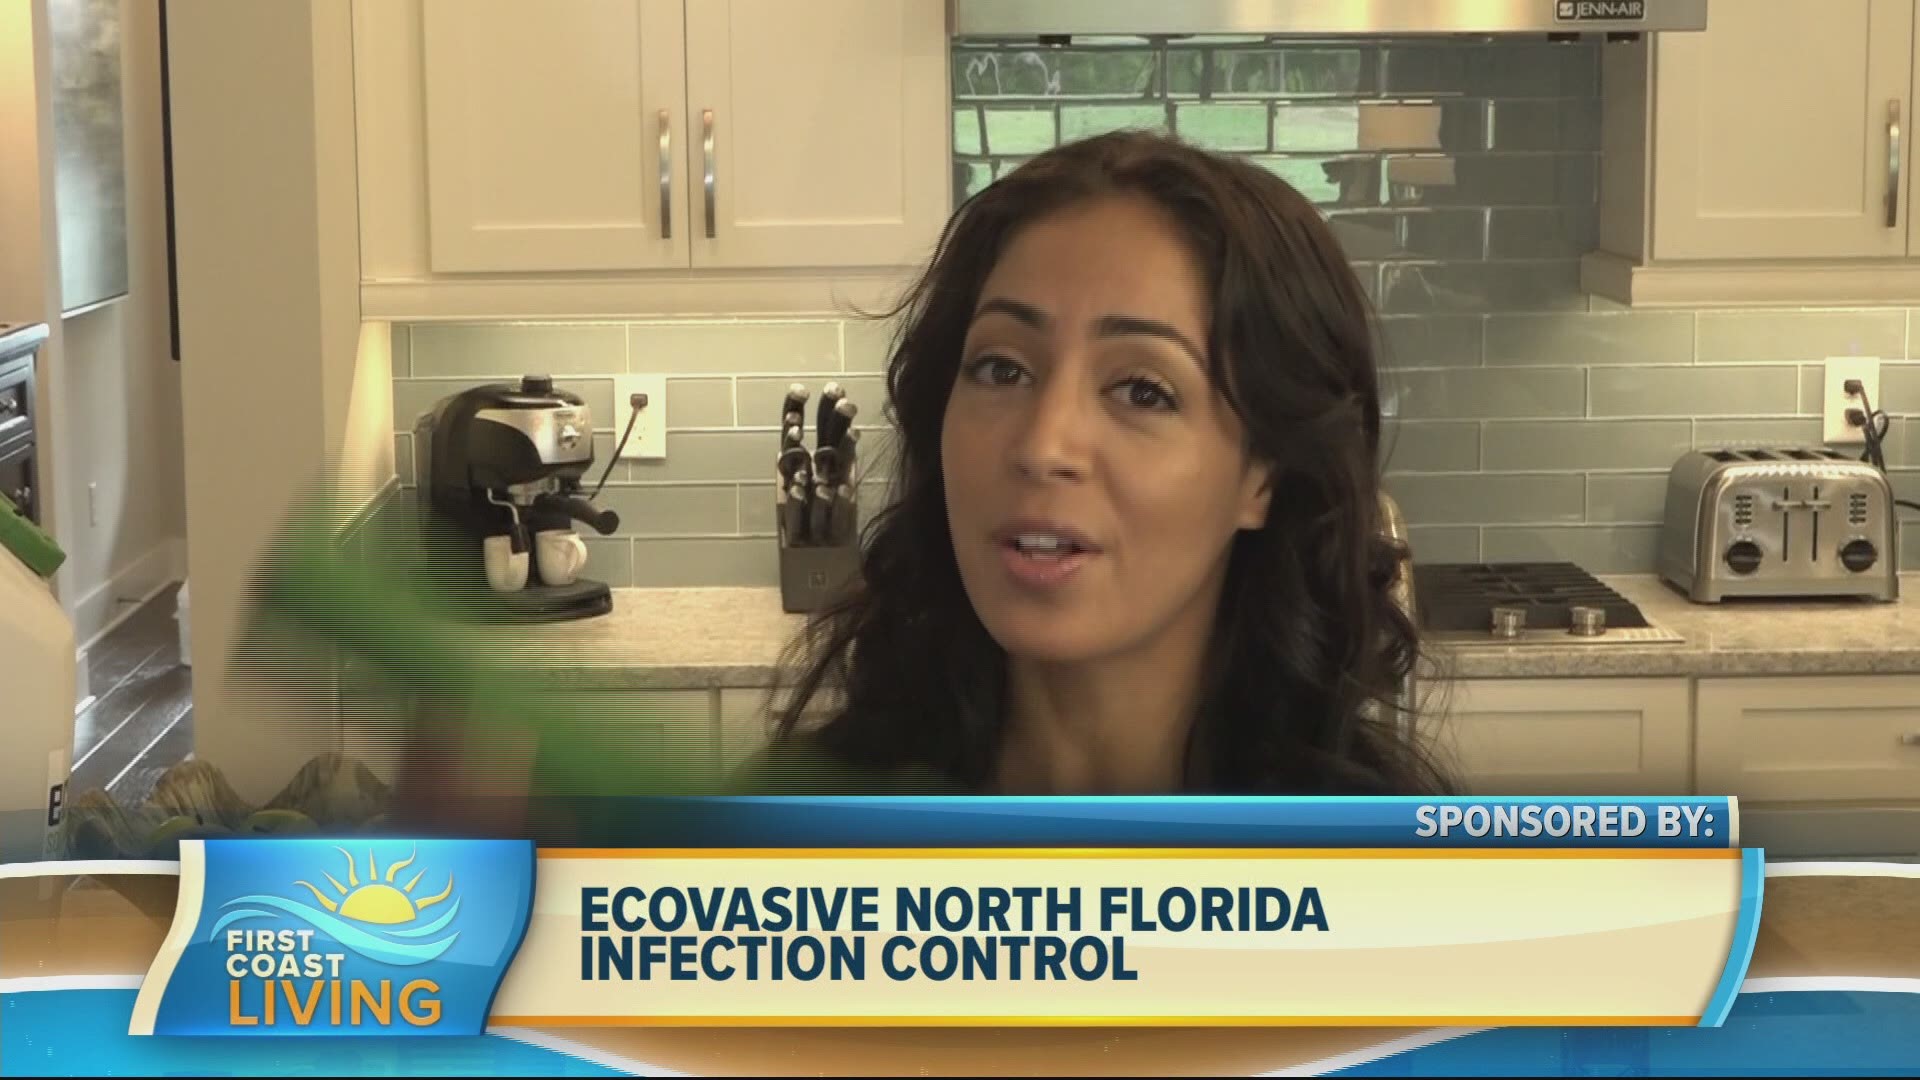 Stop germs and viruses in their tracks with the help of Ecovasive North Florida!